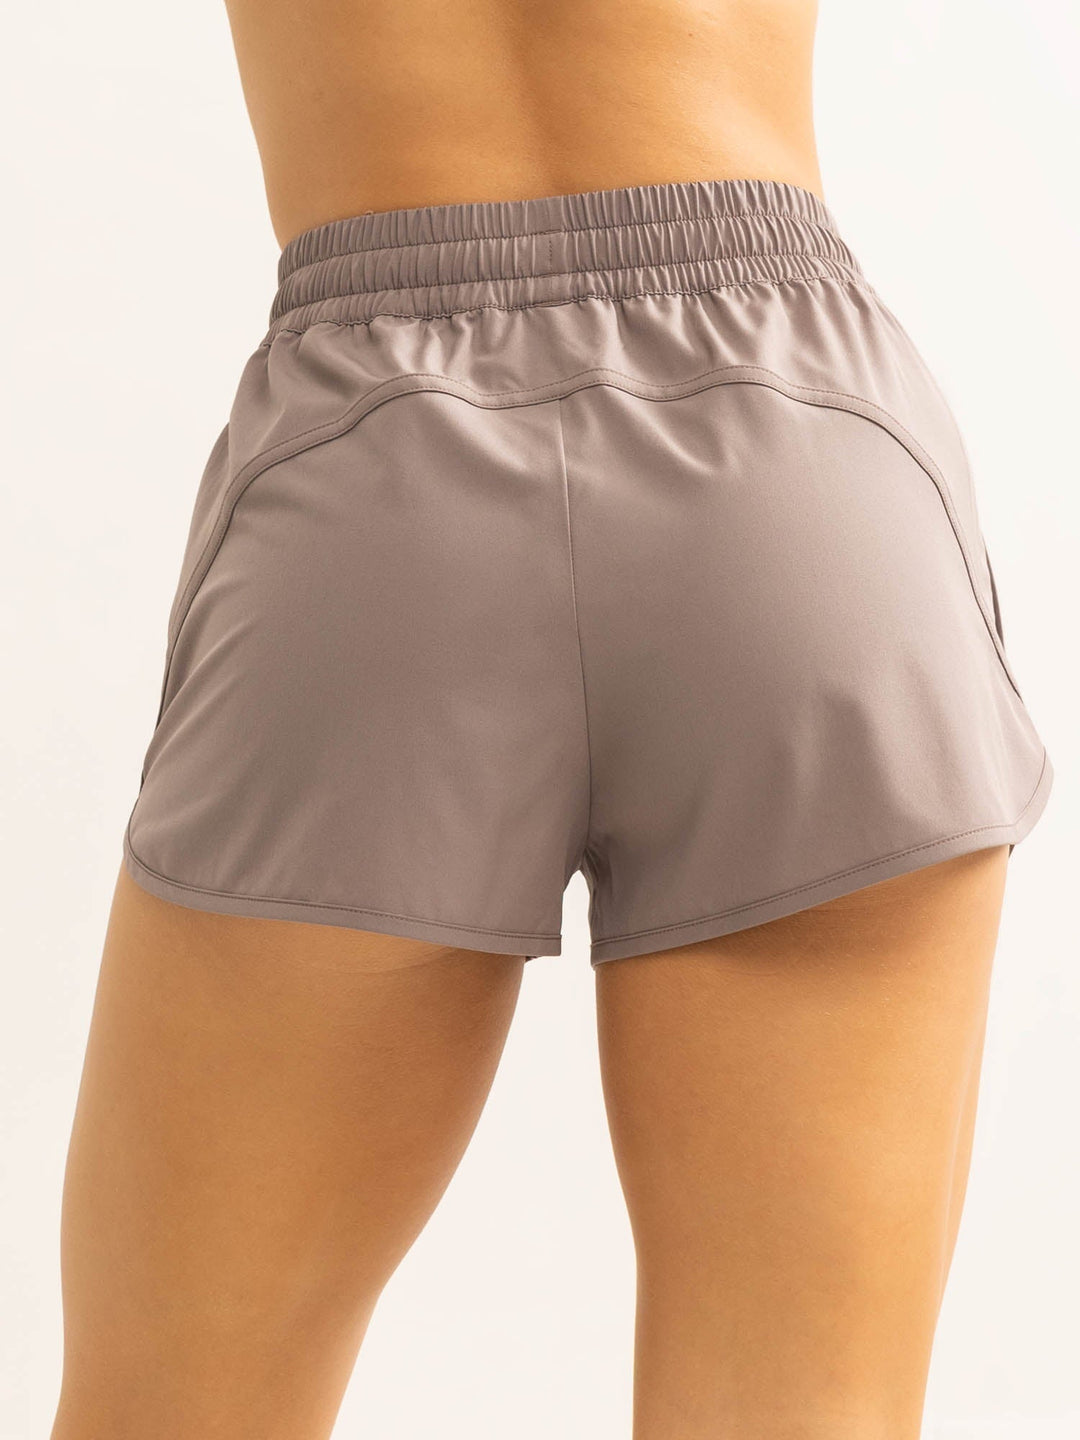 Persist Training Shorts - Taupe Clothing Ryderwear 